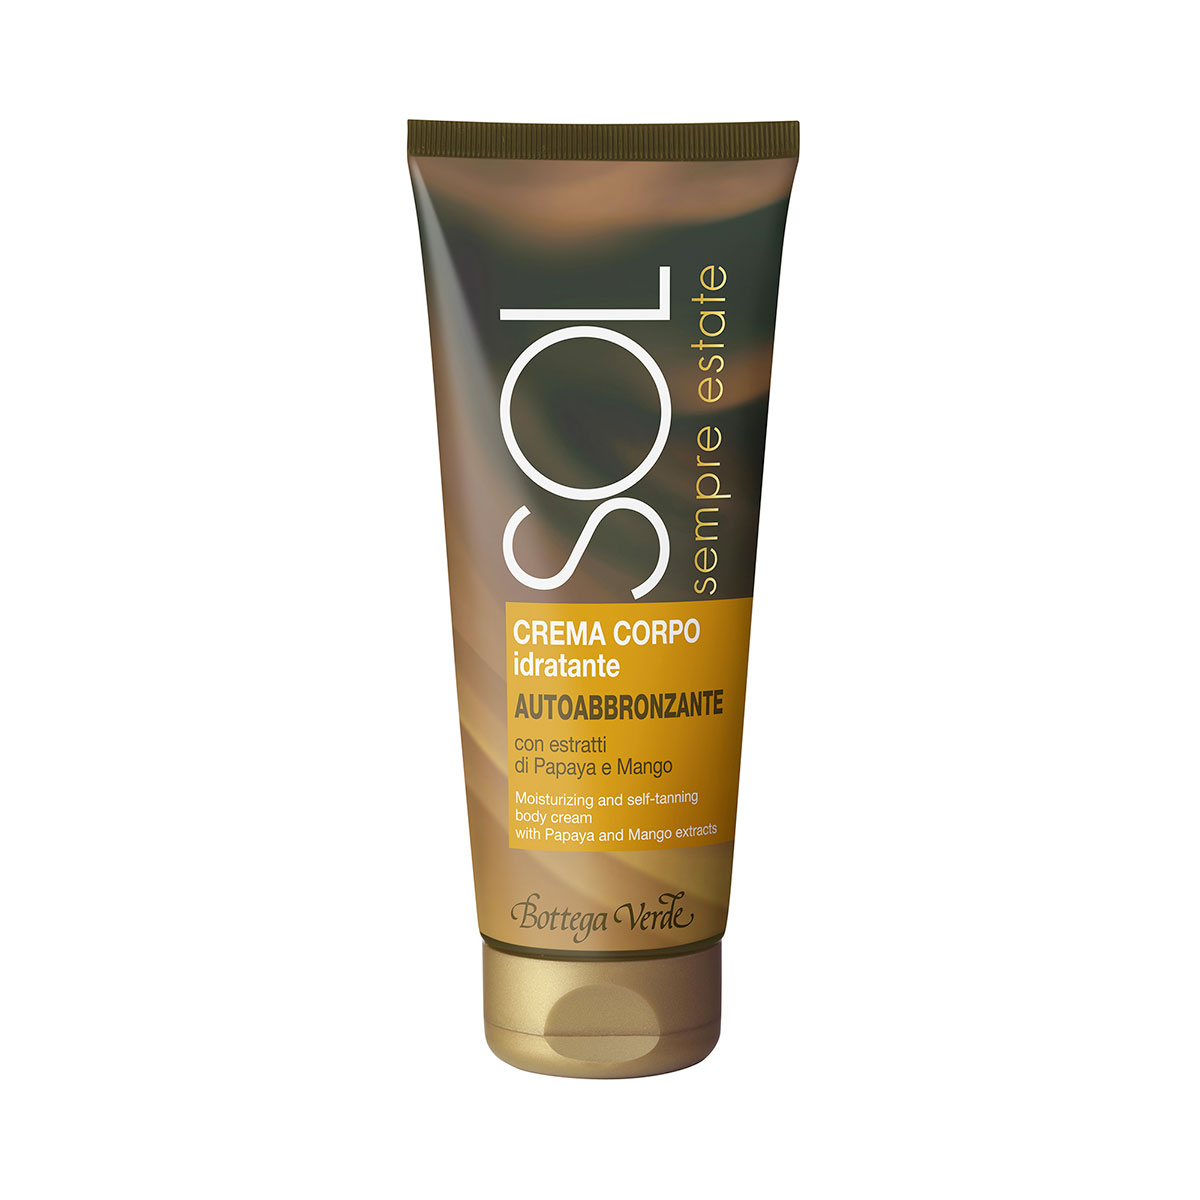 SOL Sempre Estate - Moisturizing and self-tanning body cream with Papaya and Mango extracts (200 ml) golden and natural-looking tan throughout the year